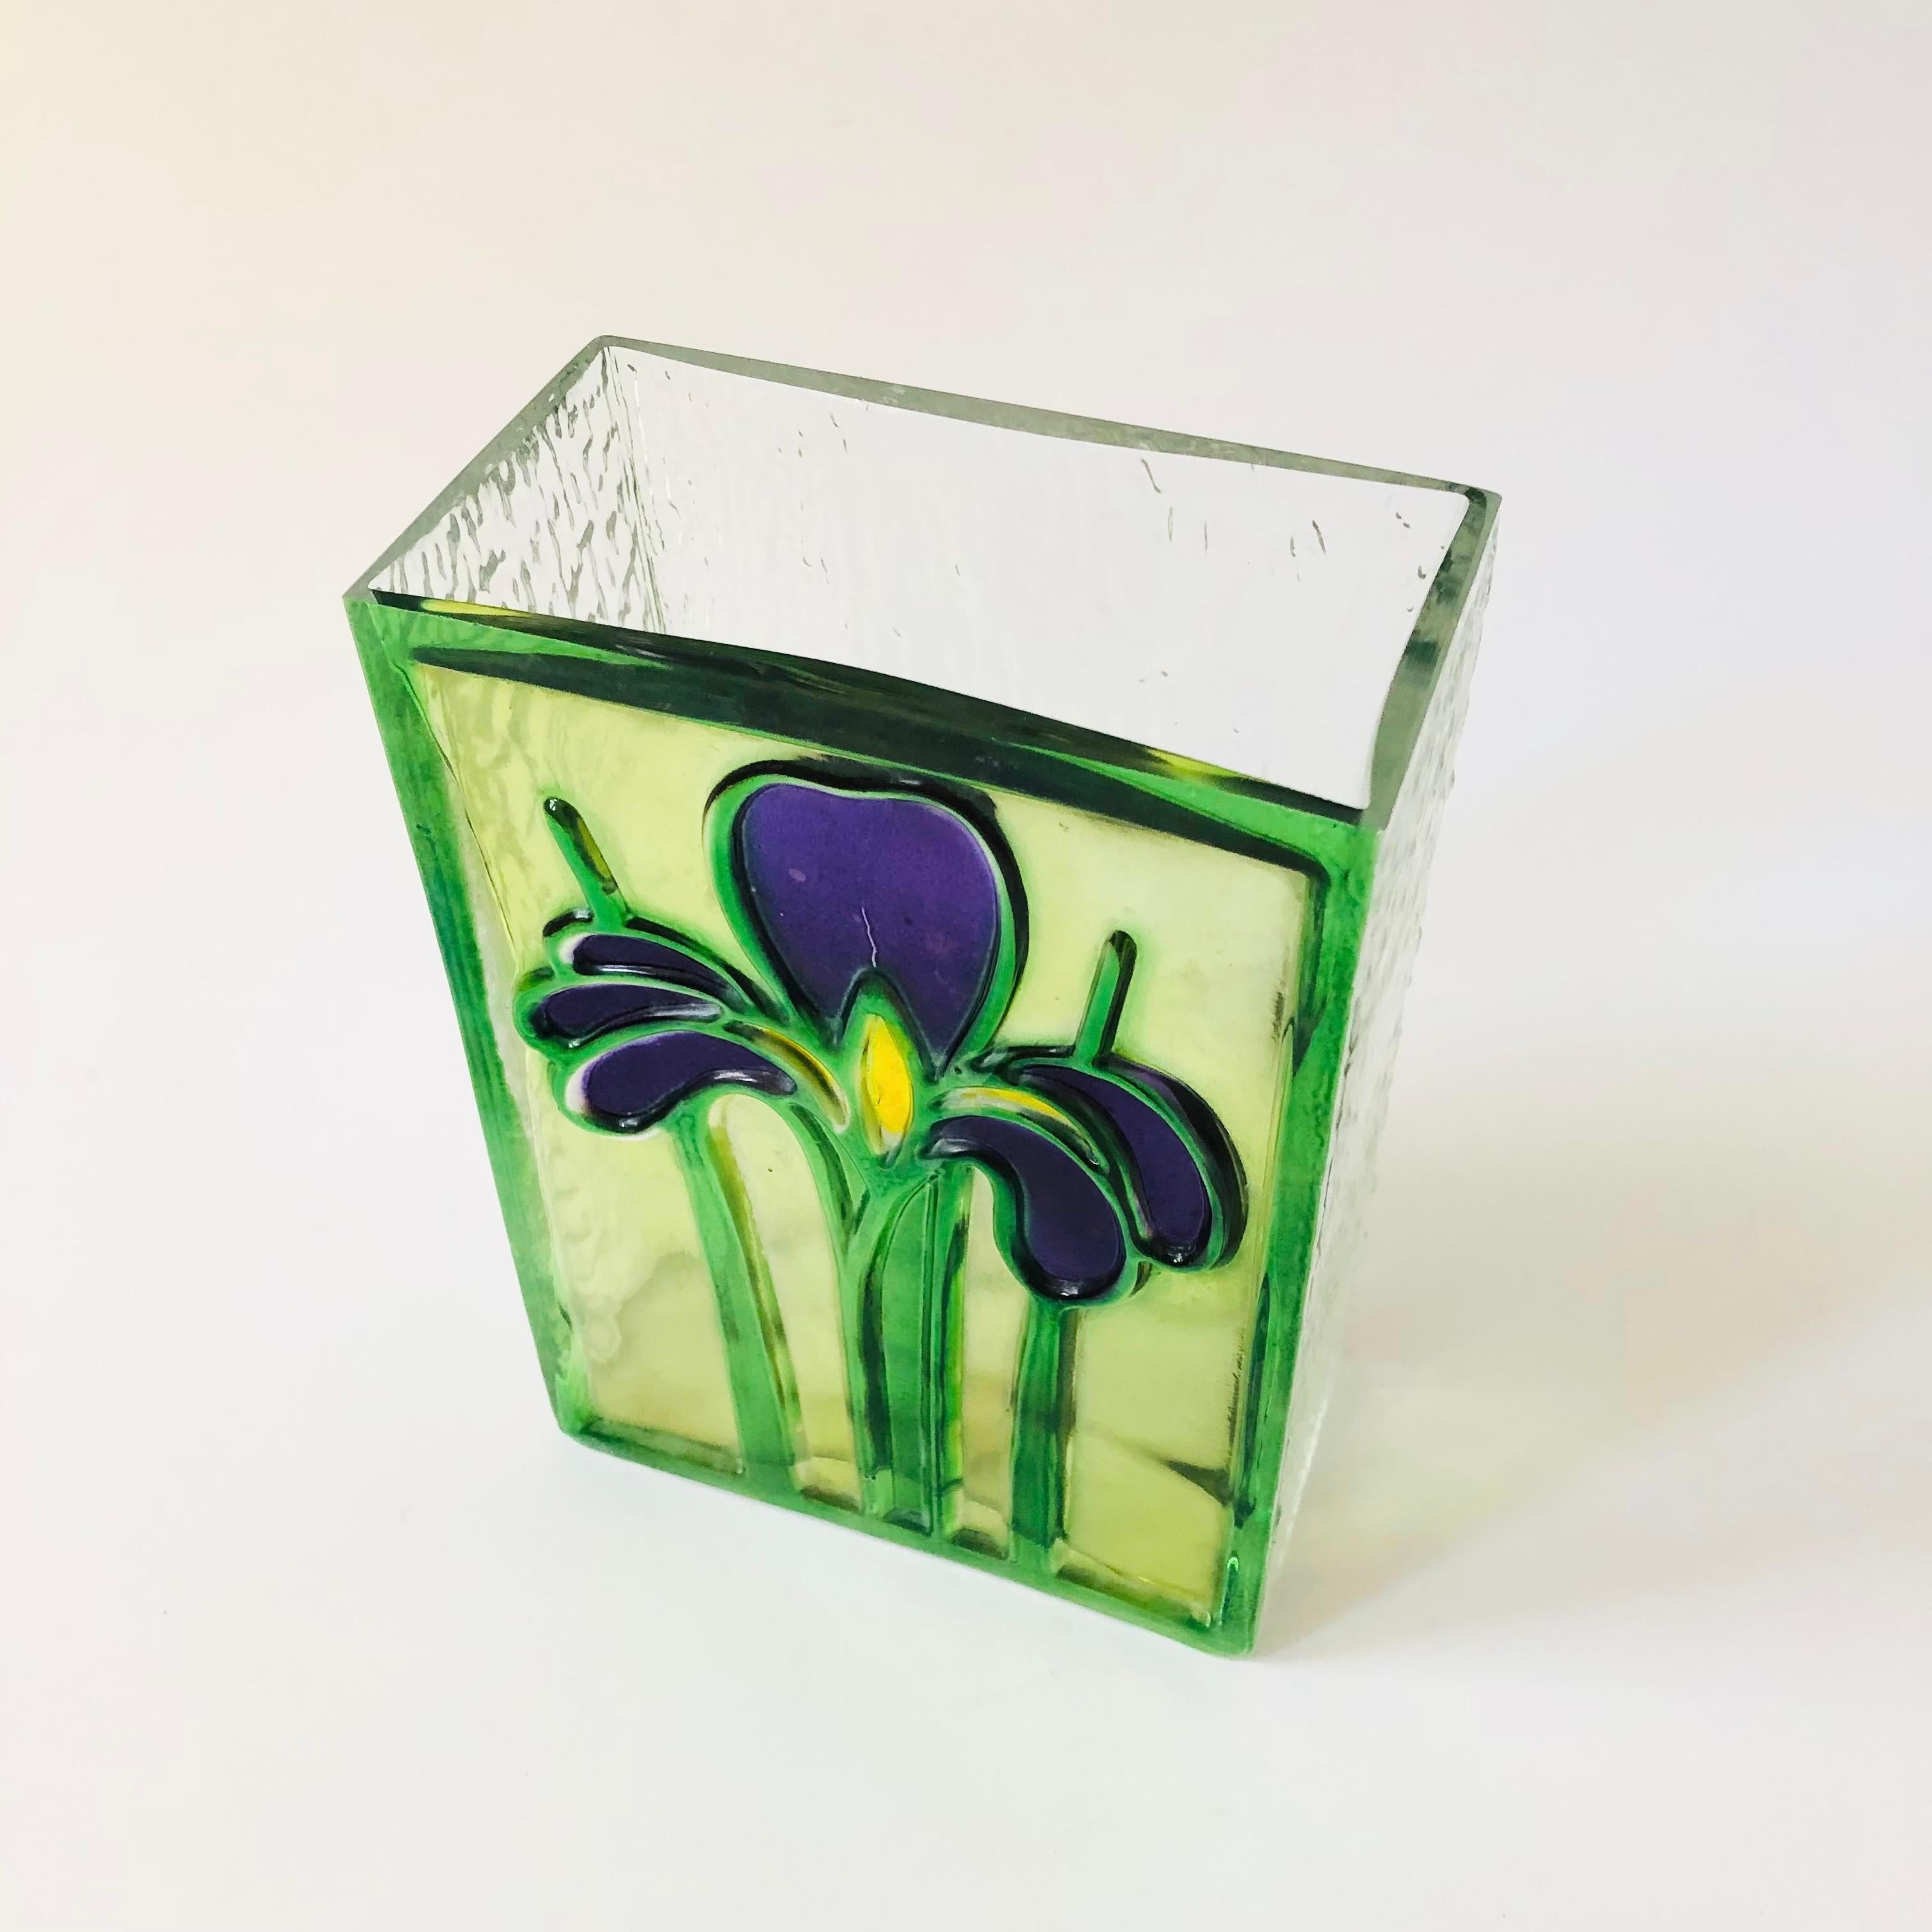 A wonderful vintage Romanian glass vase. Features textured glass an iris design on one side. Nice blocky shape. Original sticker still attached, made in 1985 by FDTA.

